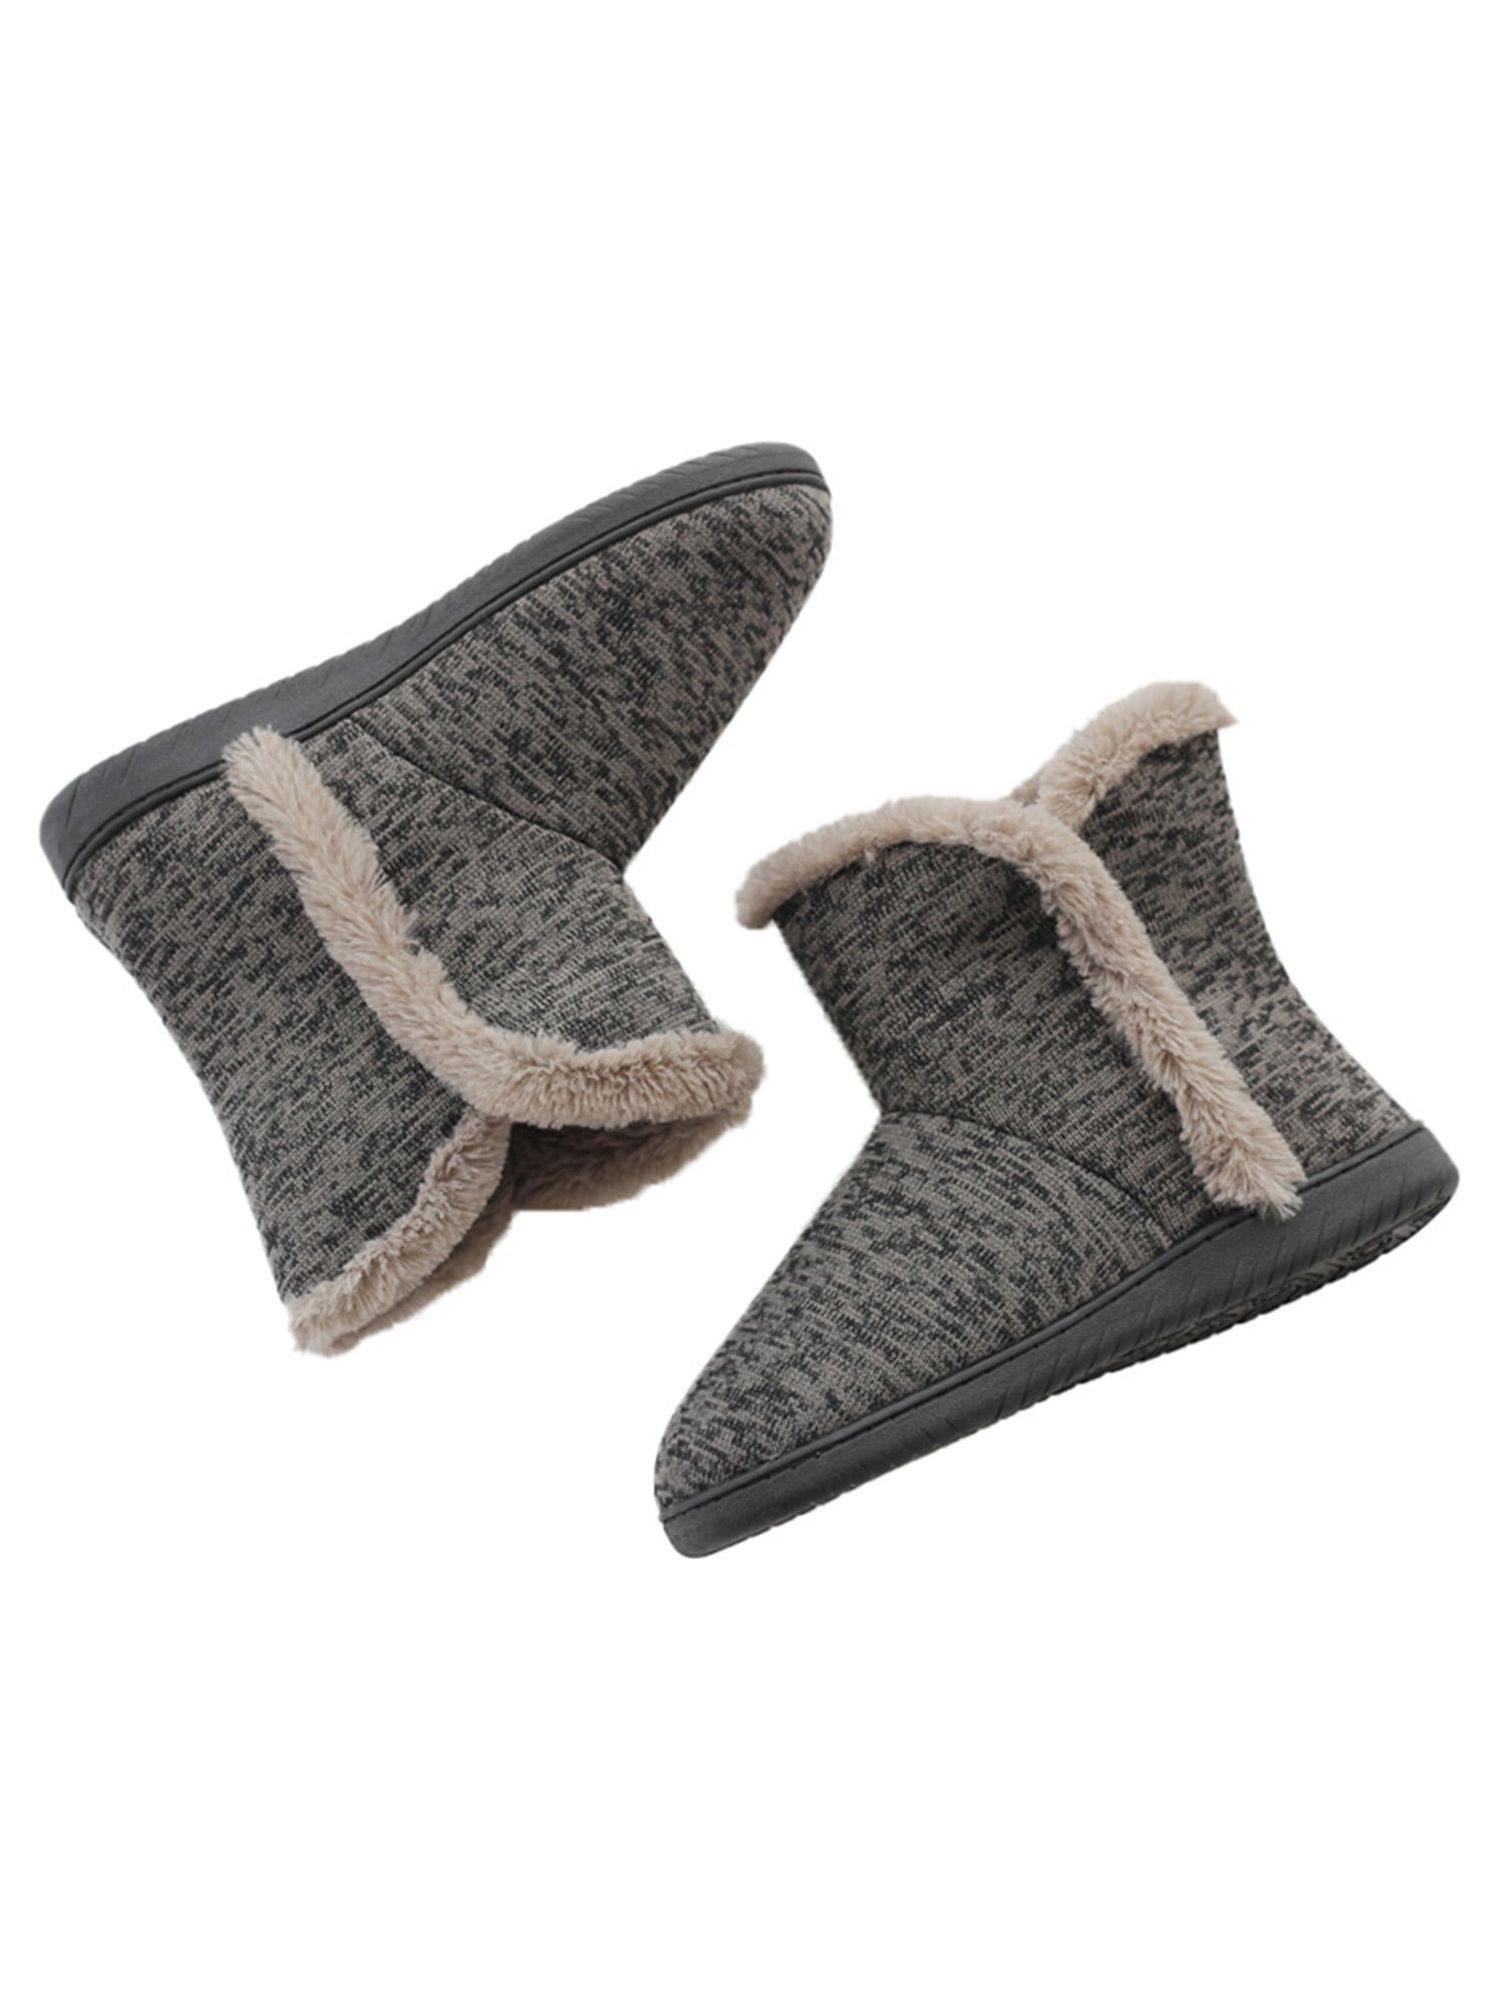 Mens Bootie Slippers Winter Boots Plush House Shoes WAY4 - image 3 of 4